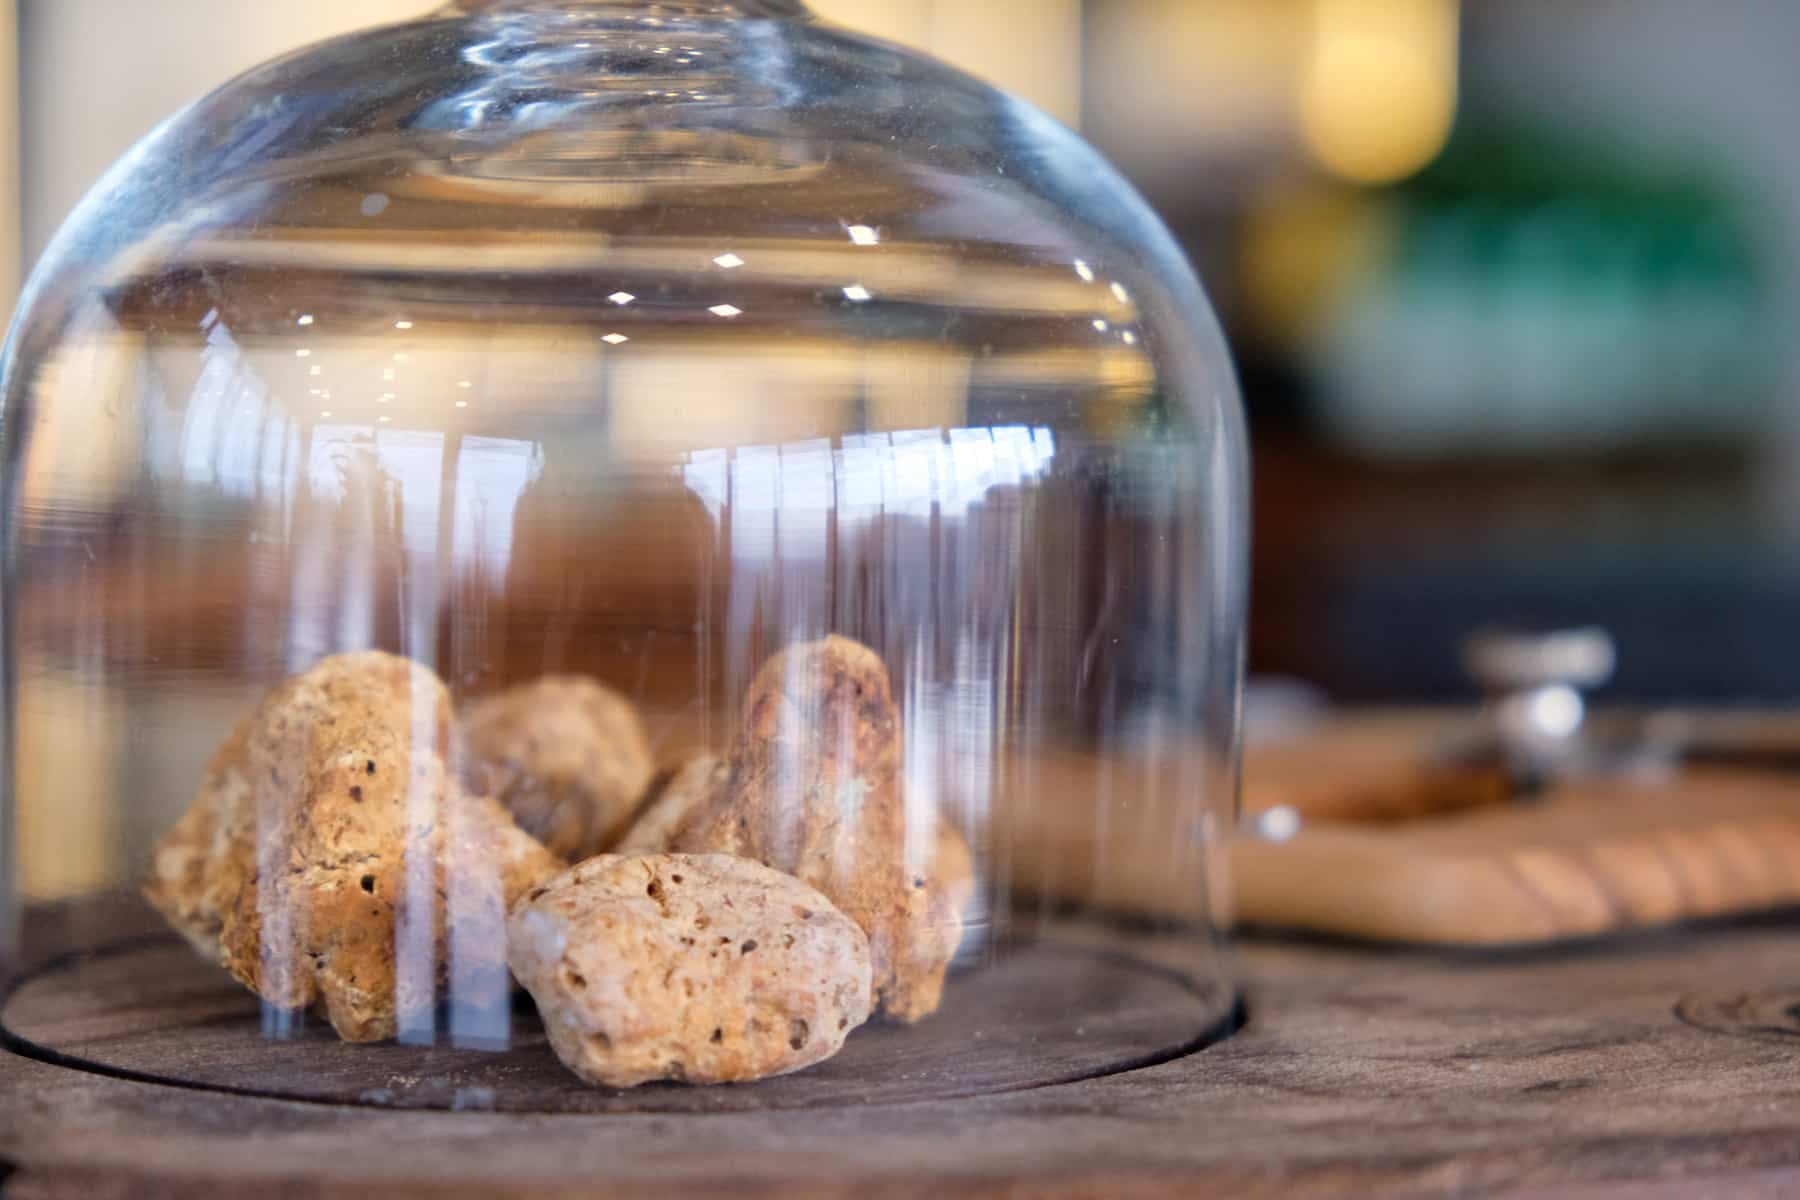 Truffles from Istria under a glass dome on a wooden table.